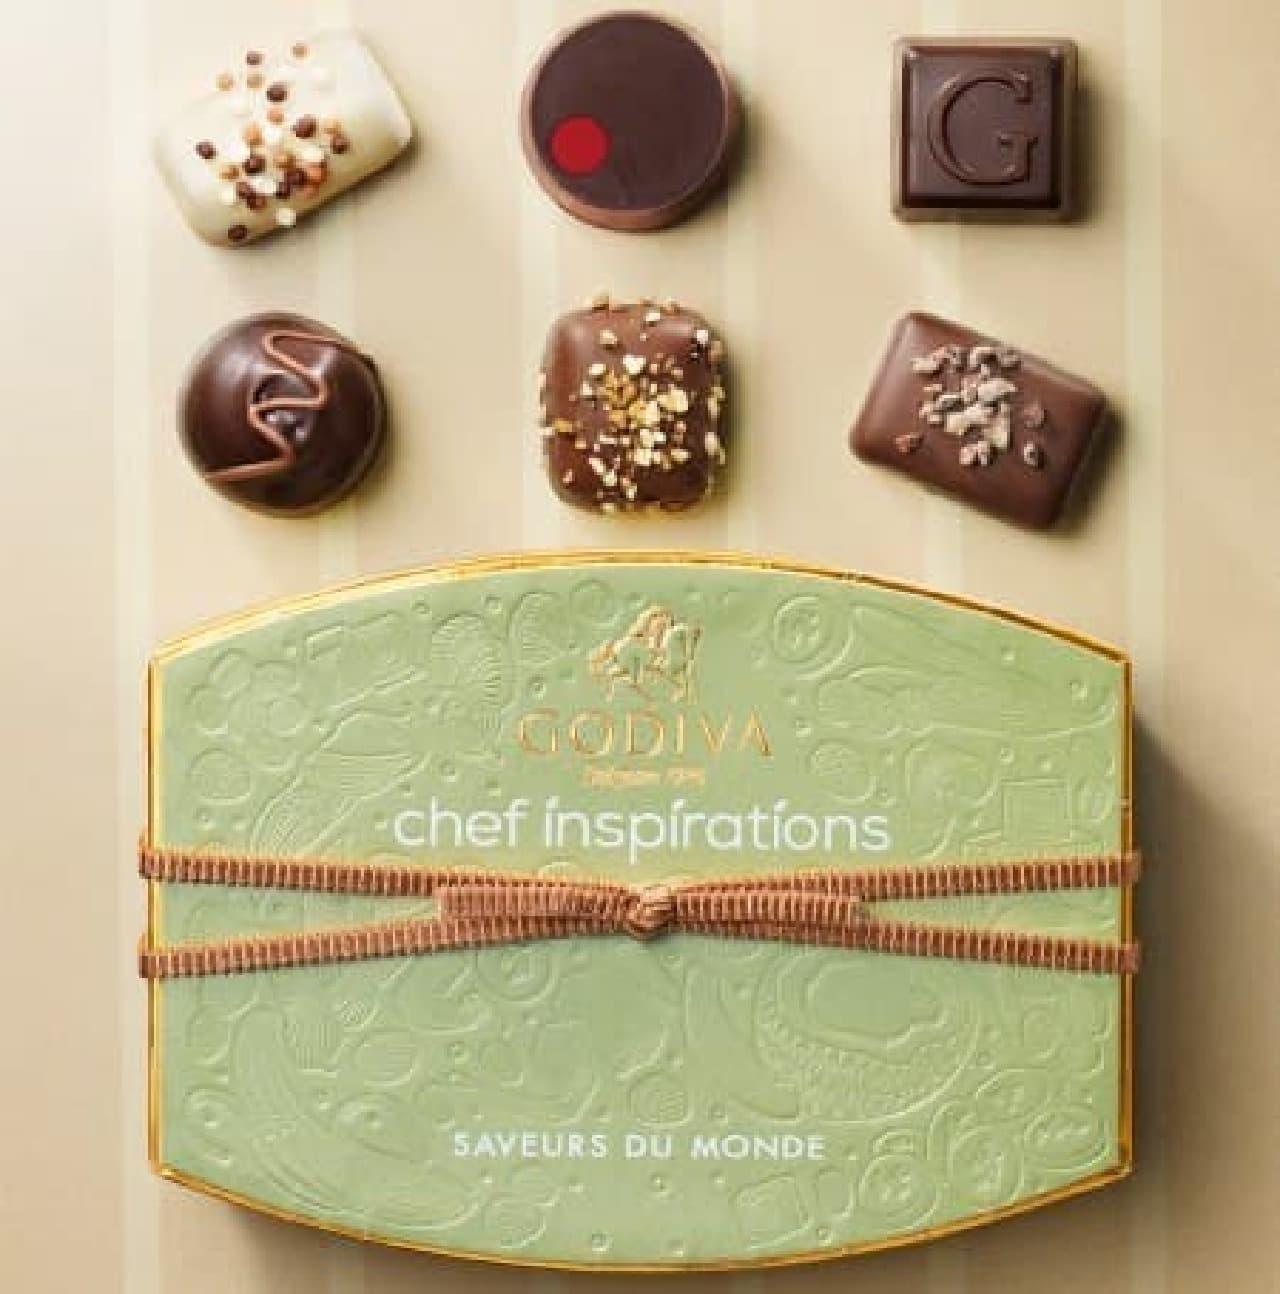 A combination of "world ingredients" found by the chef and Godiva chocolate